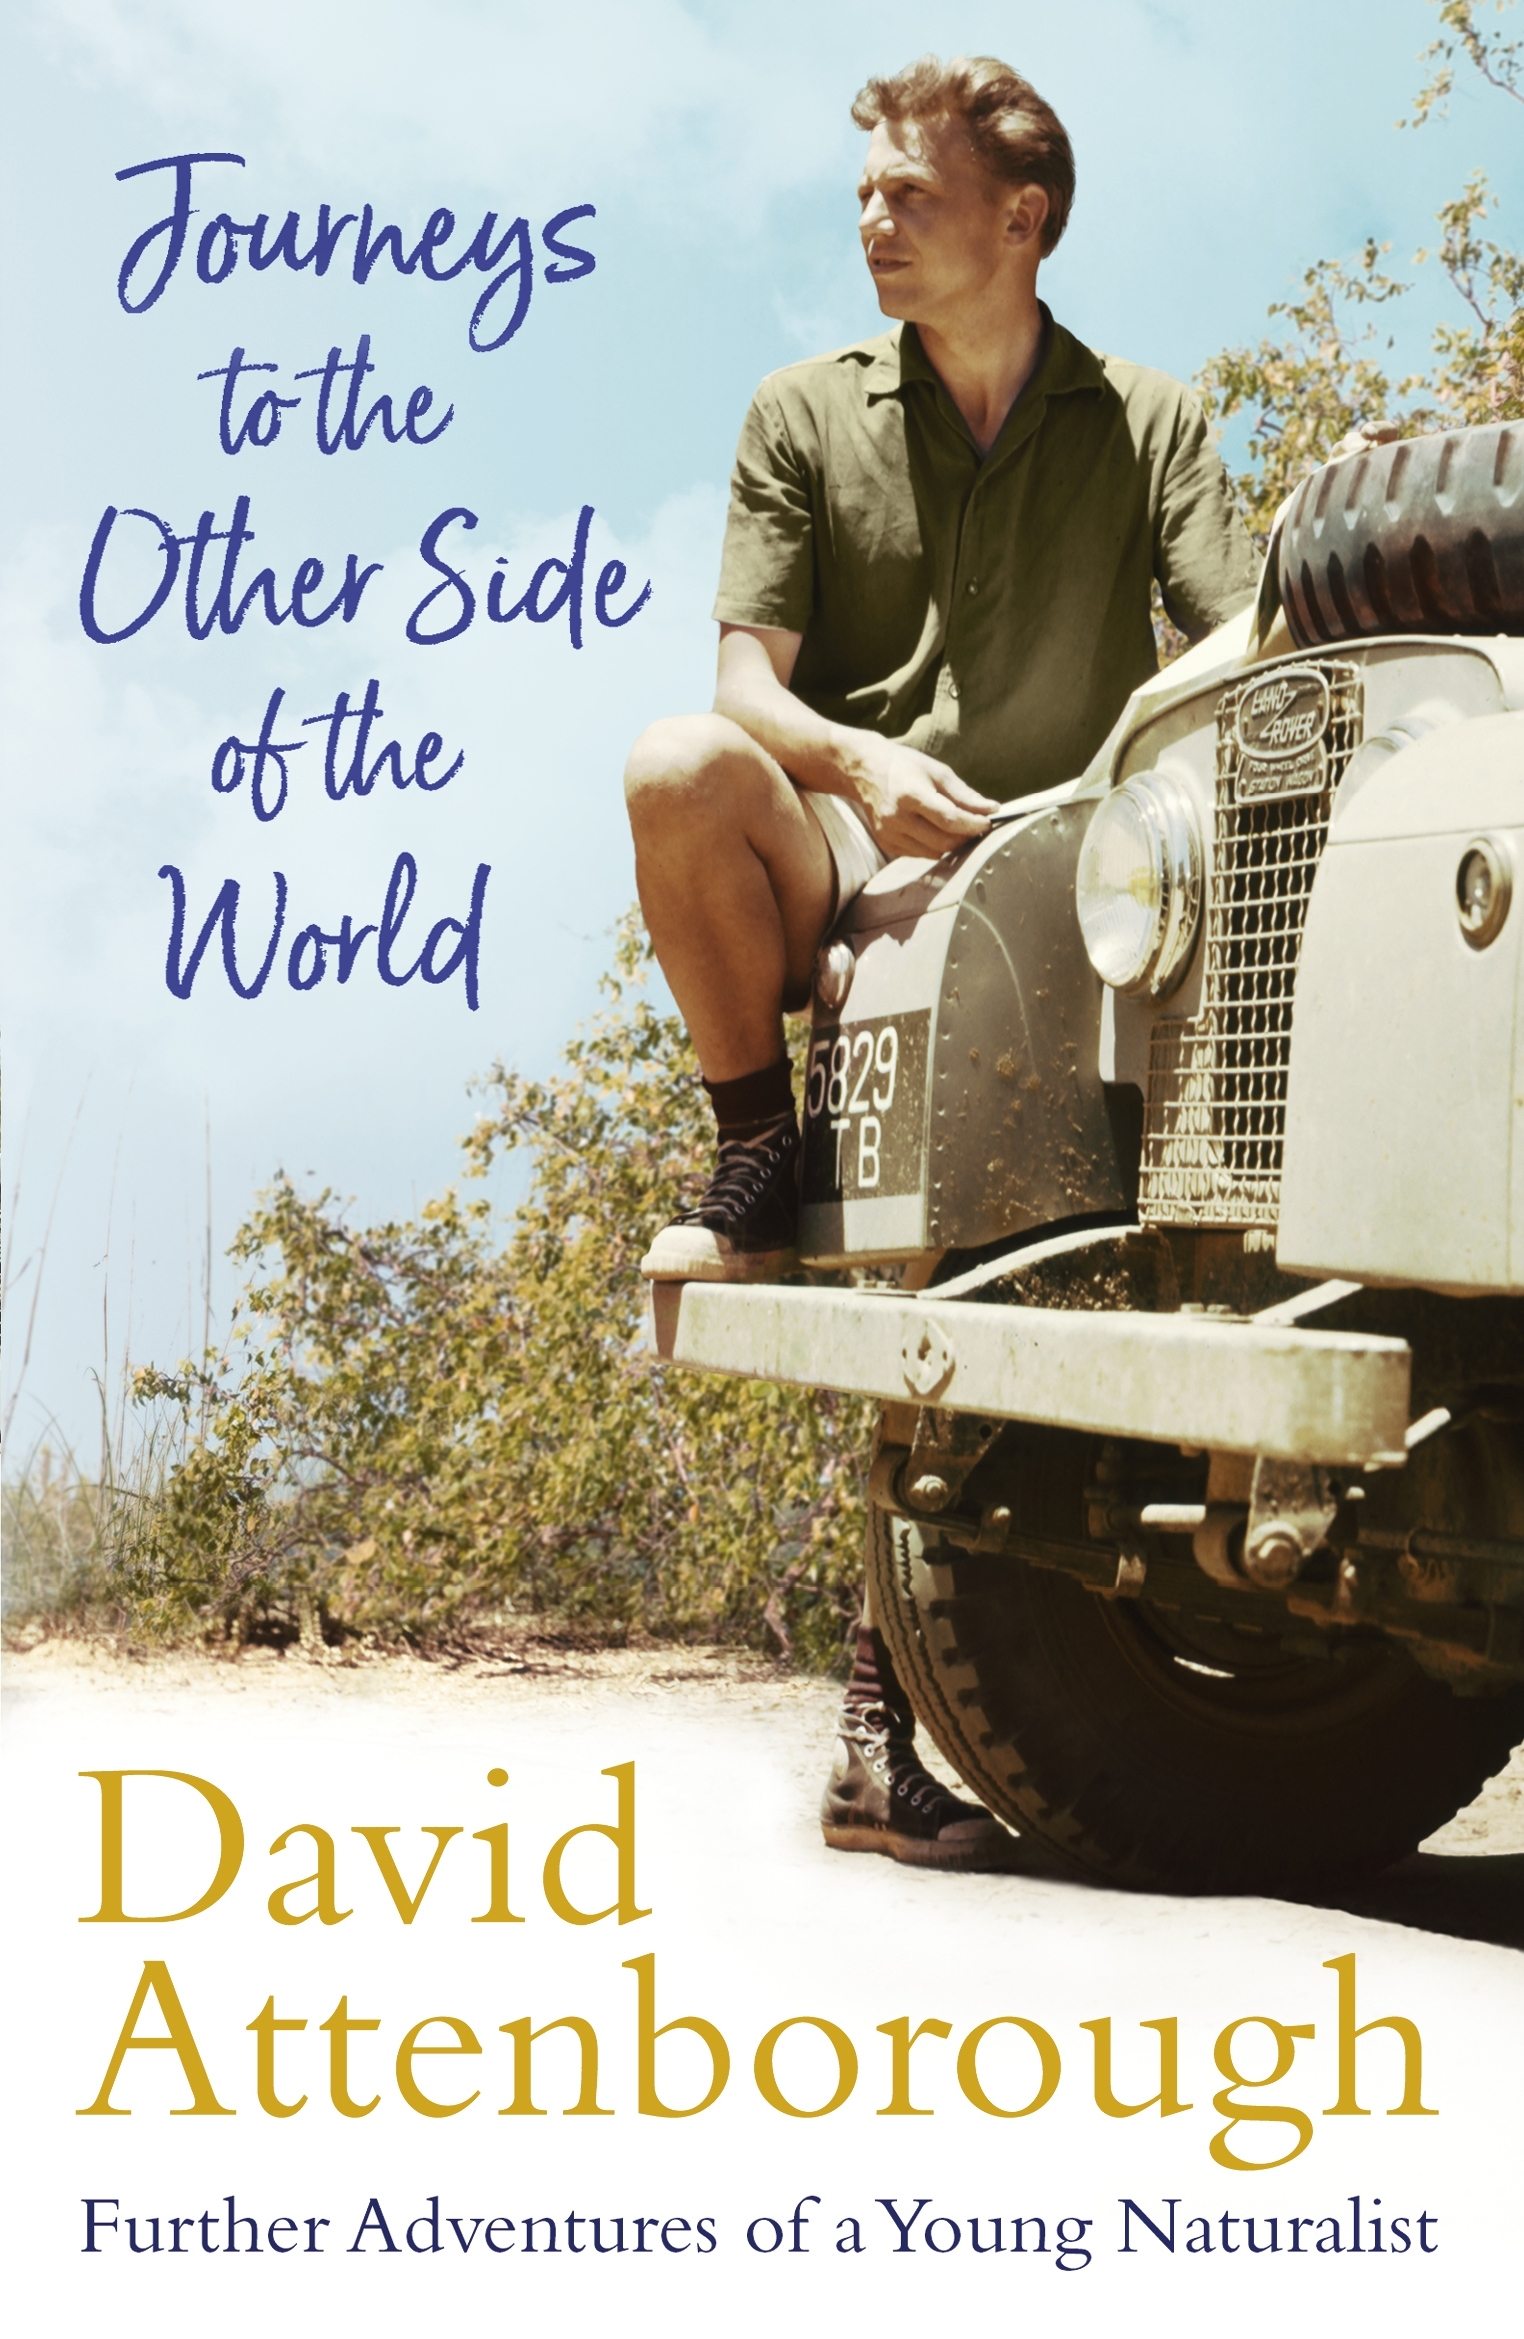 Sir David Attenborough's Journeys to the Other Side of the World: Further Adventures of a Young Naturalist